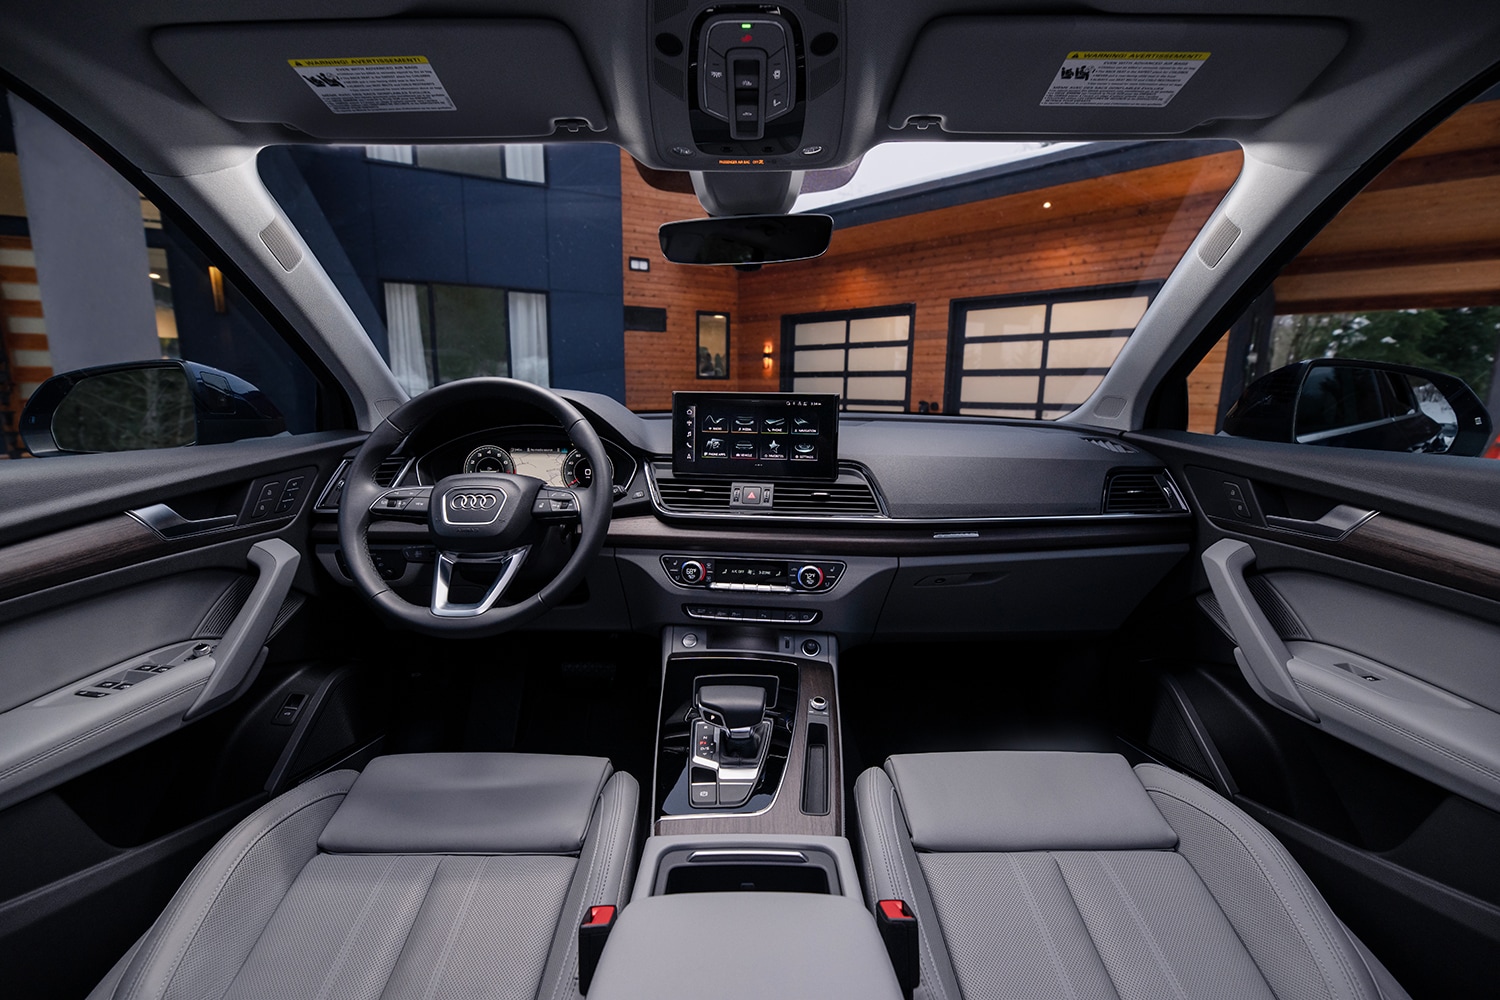 Steering wheel, dashboard and front seats of a new 2023 Audi Q5.